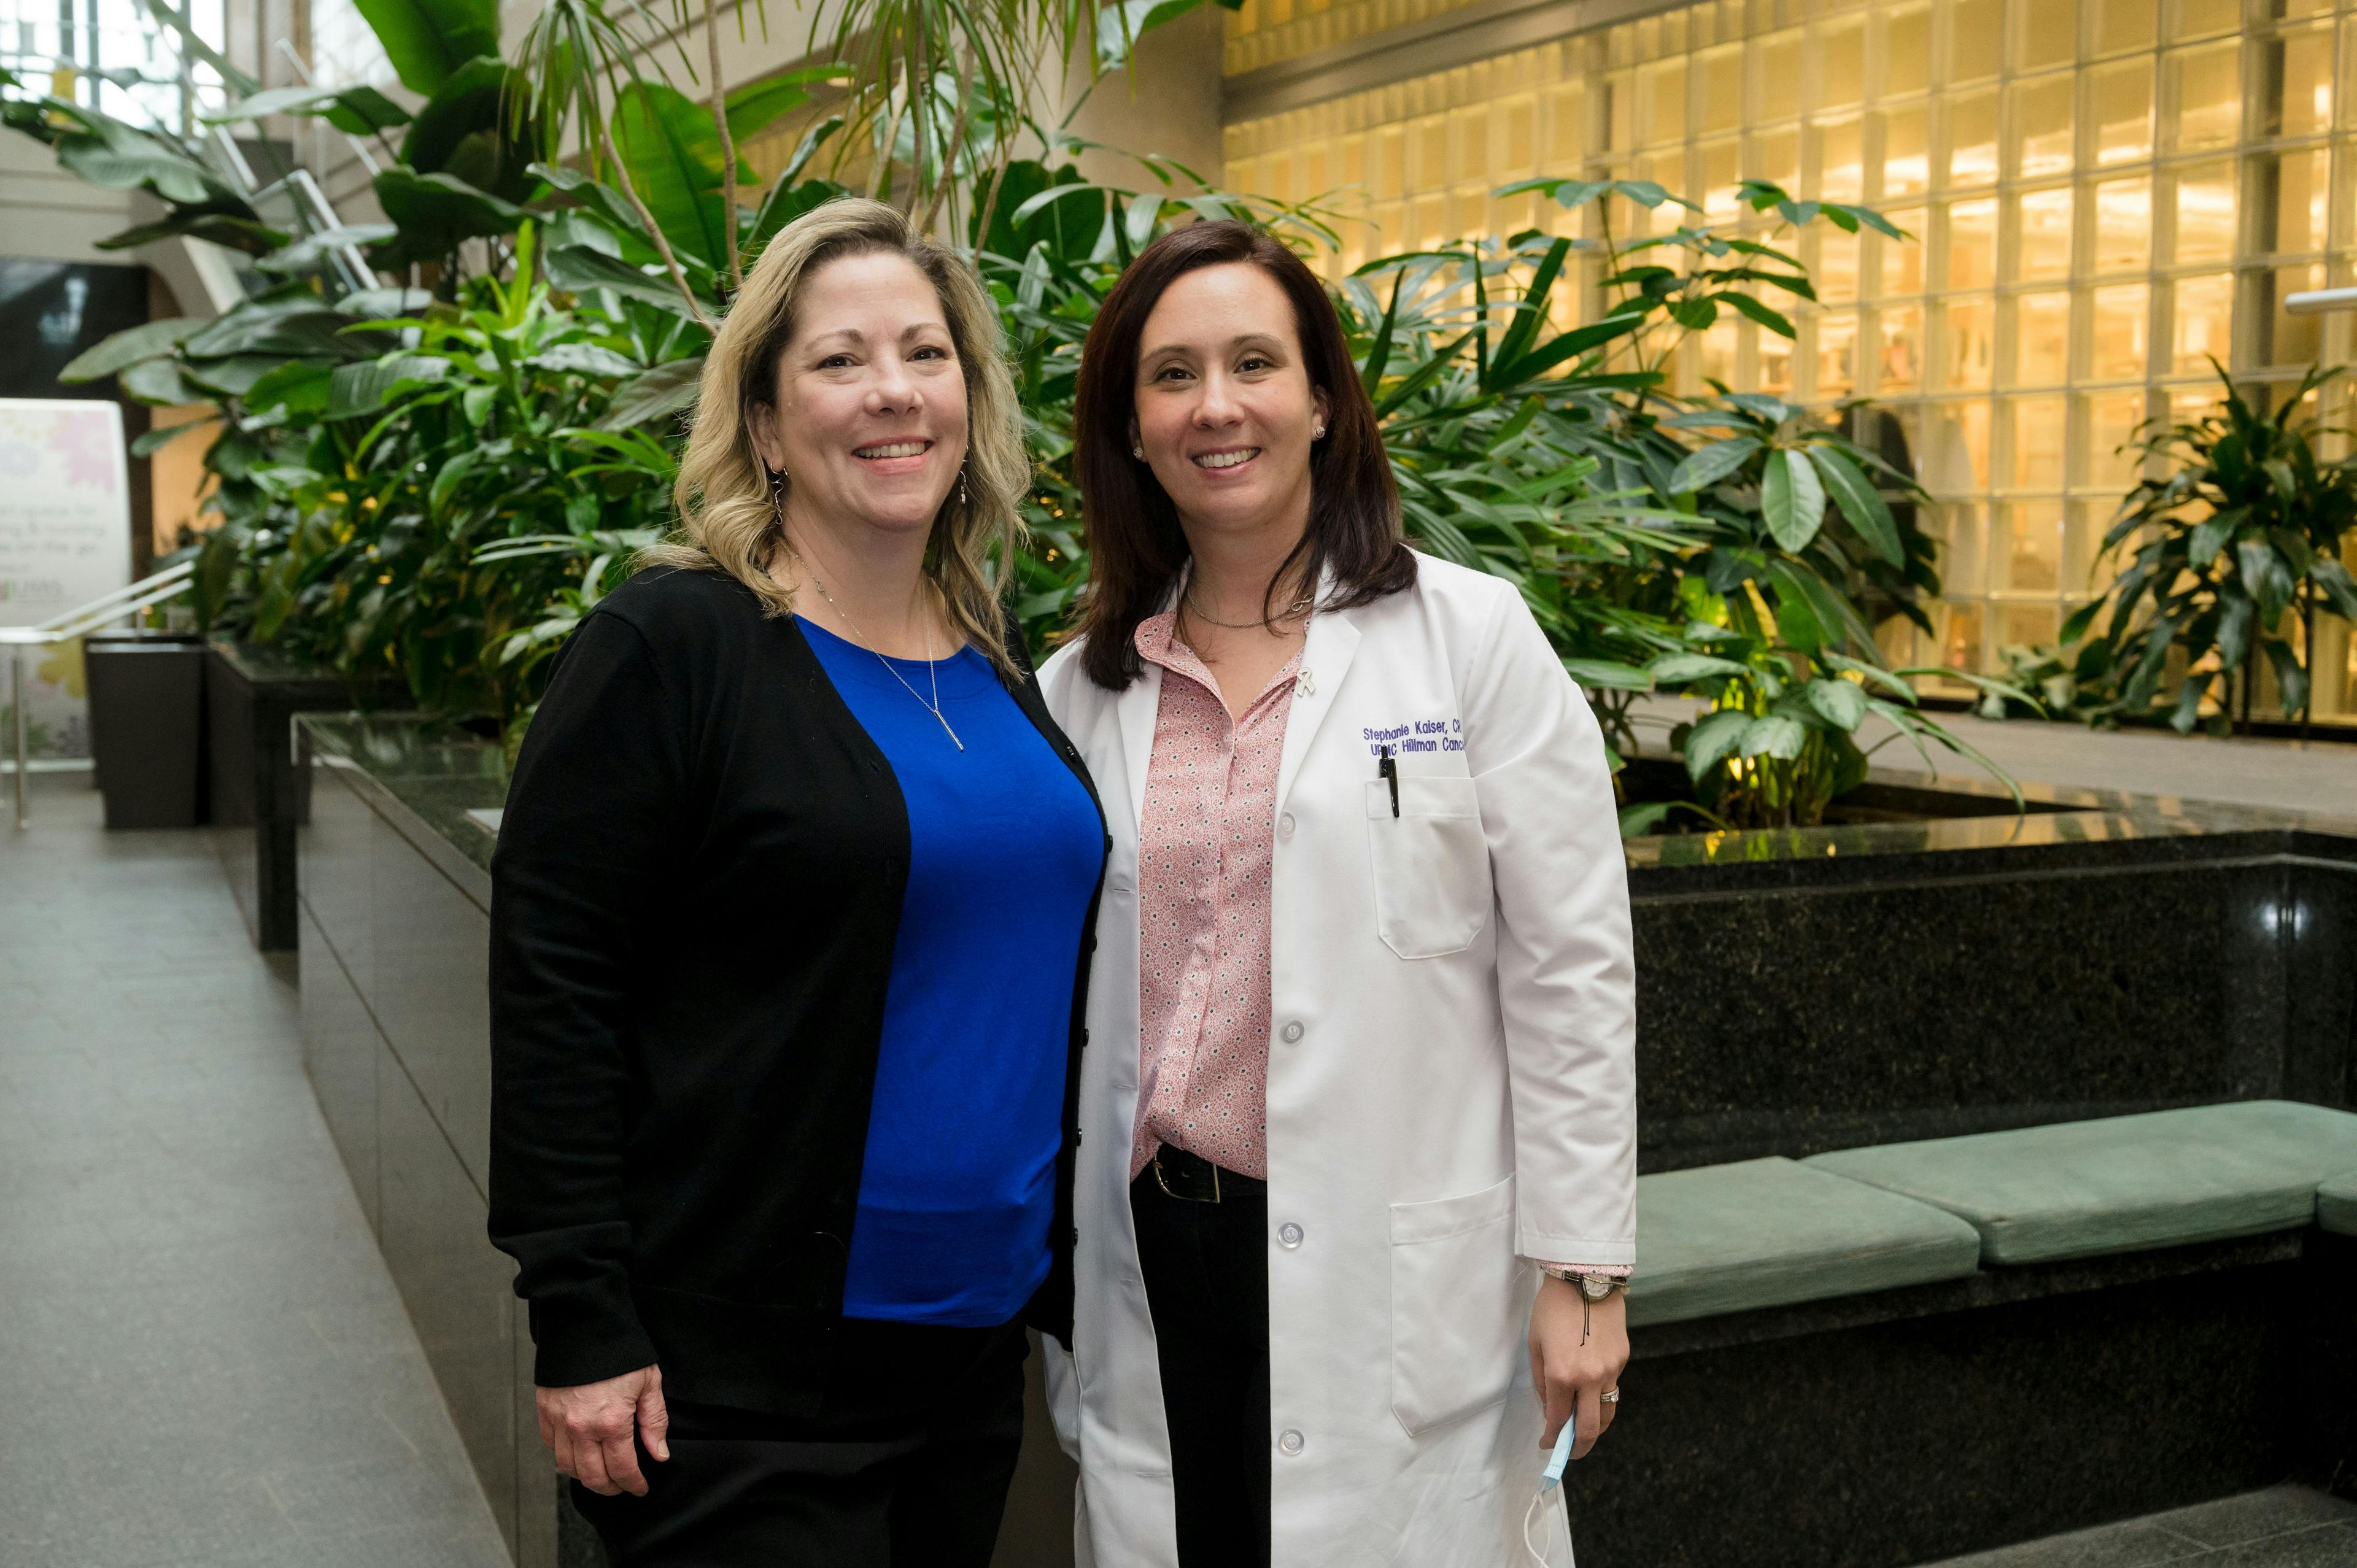 Stephanie Kaiser (right) stands with her nominator, Elizabeth de Jong, inside the lobby of the UPMC Hillman Cancer Center in Pittsburgh. 